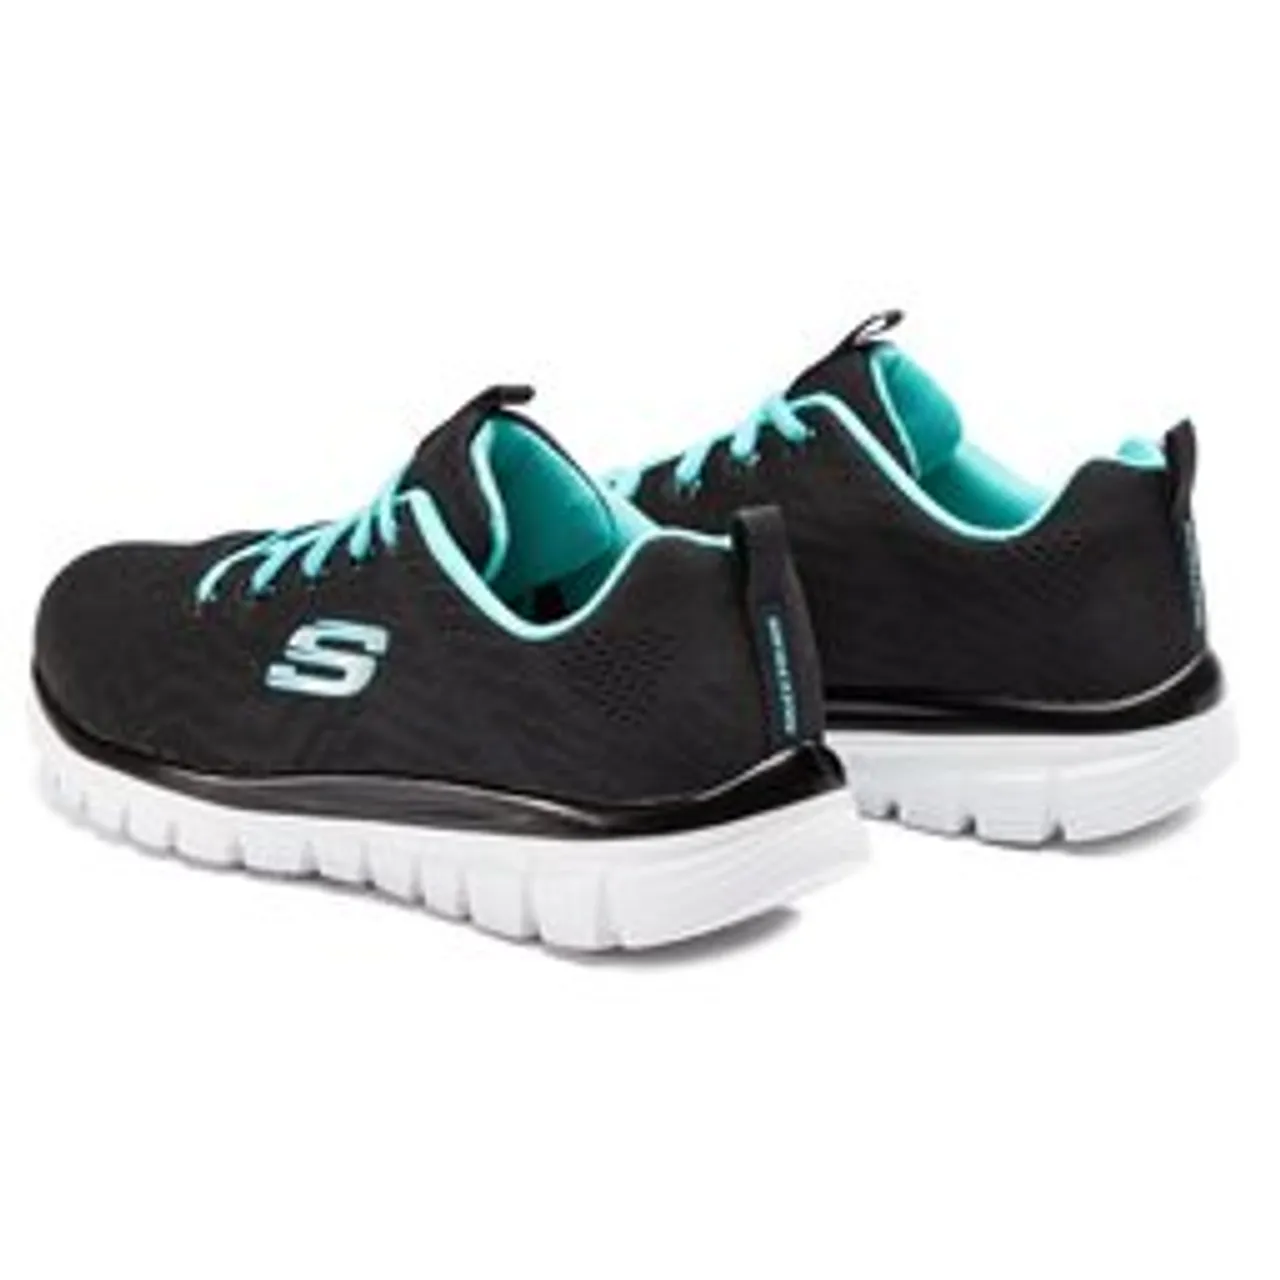 Sneakers Skechers Get Connected 12615/BKTQ Black/Turquoise